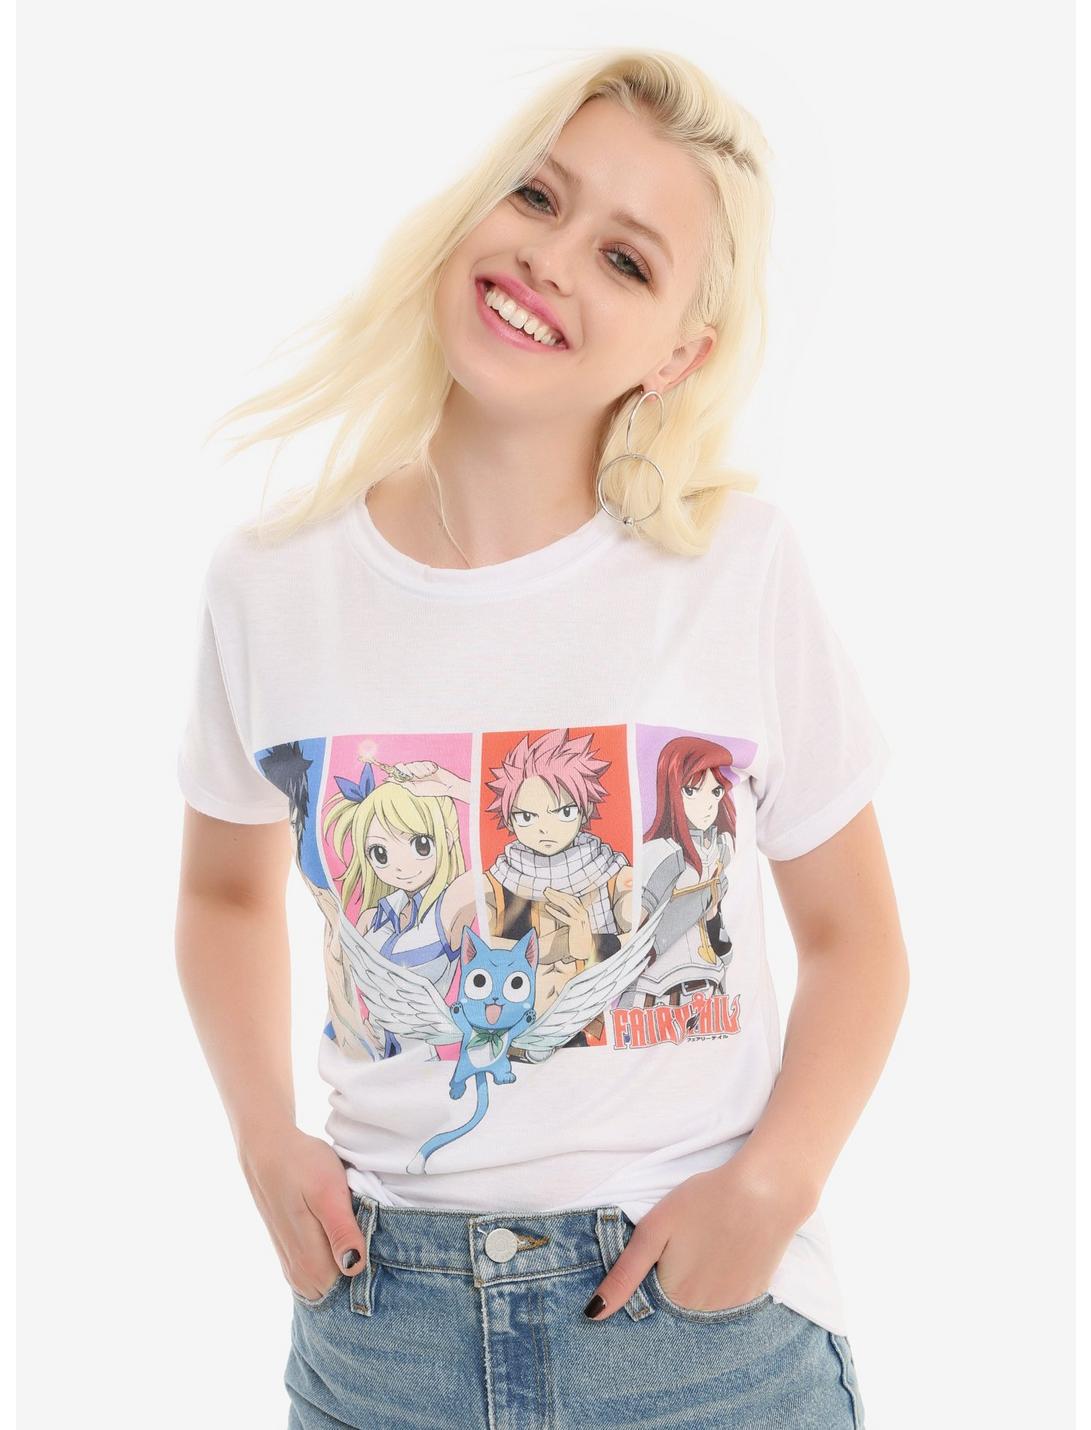 Fairy Tail Boxed Group Girls T-Shirt, WHITE, hi-res